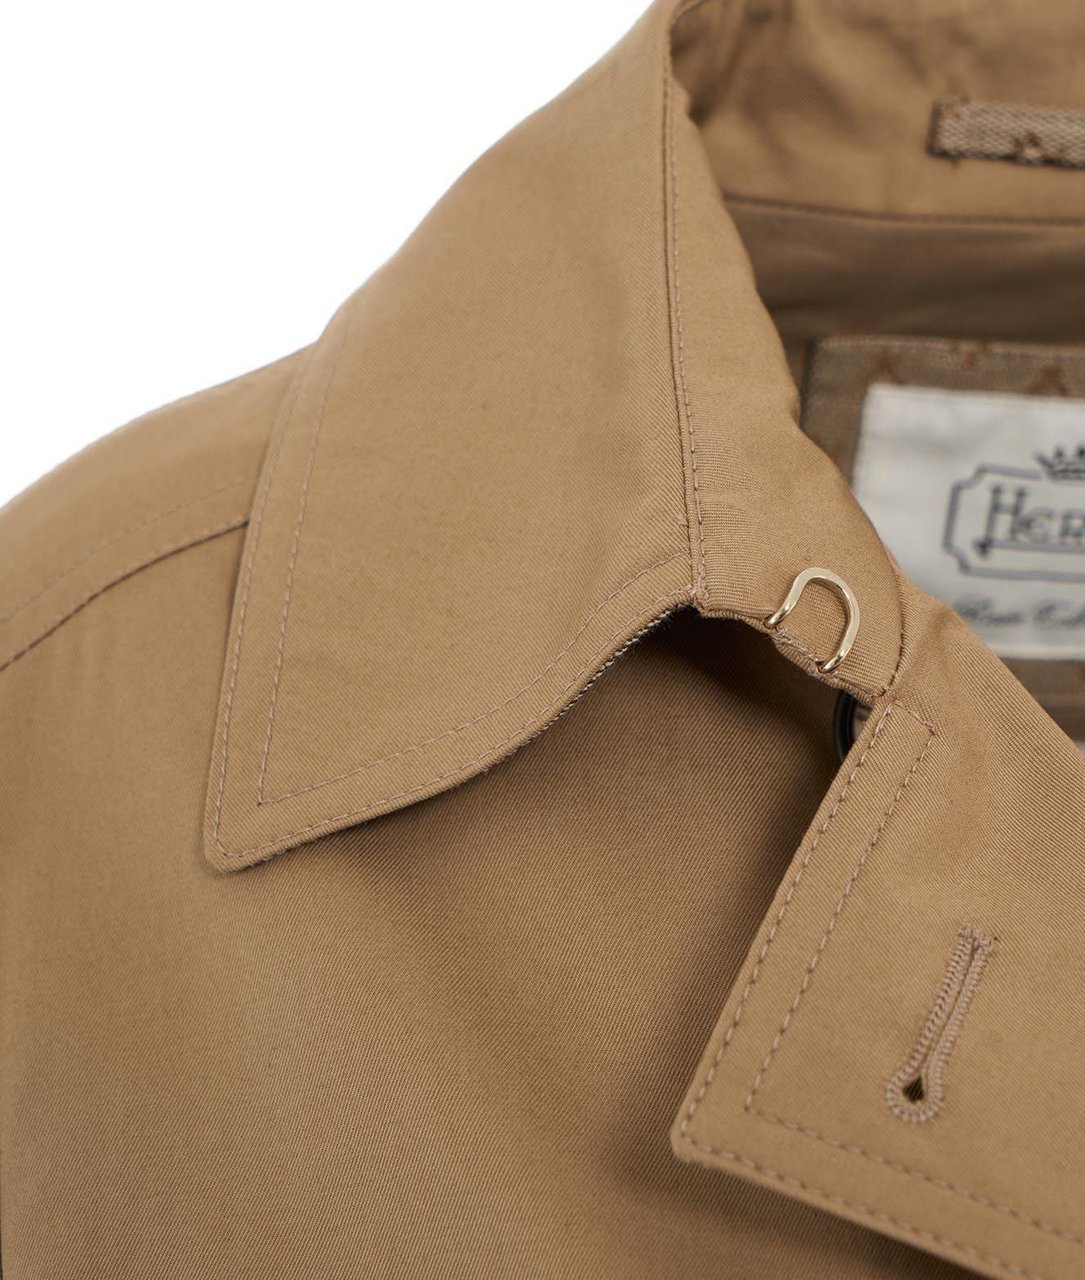 Herno Trench coat double-breasted Bruin